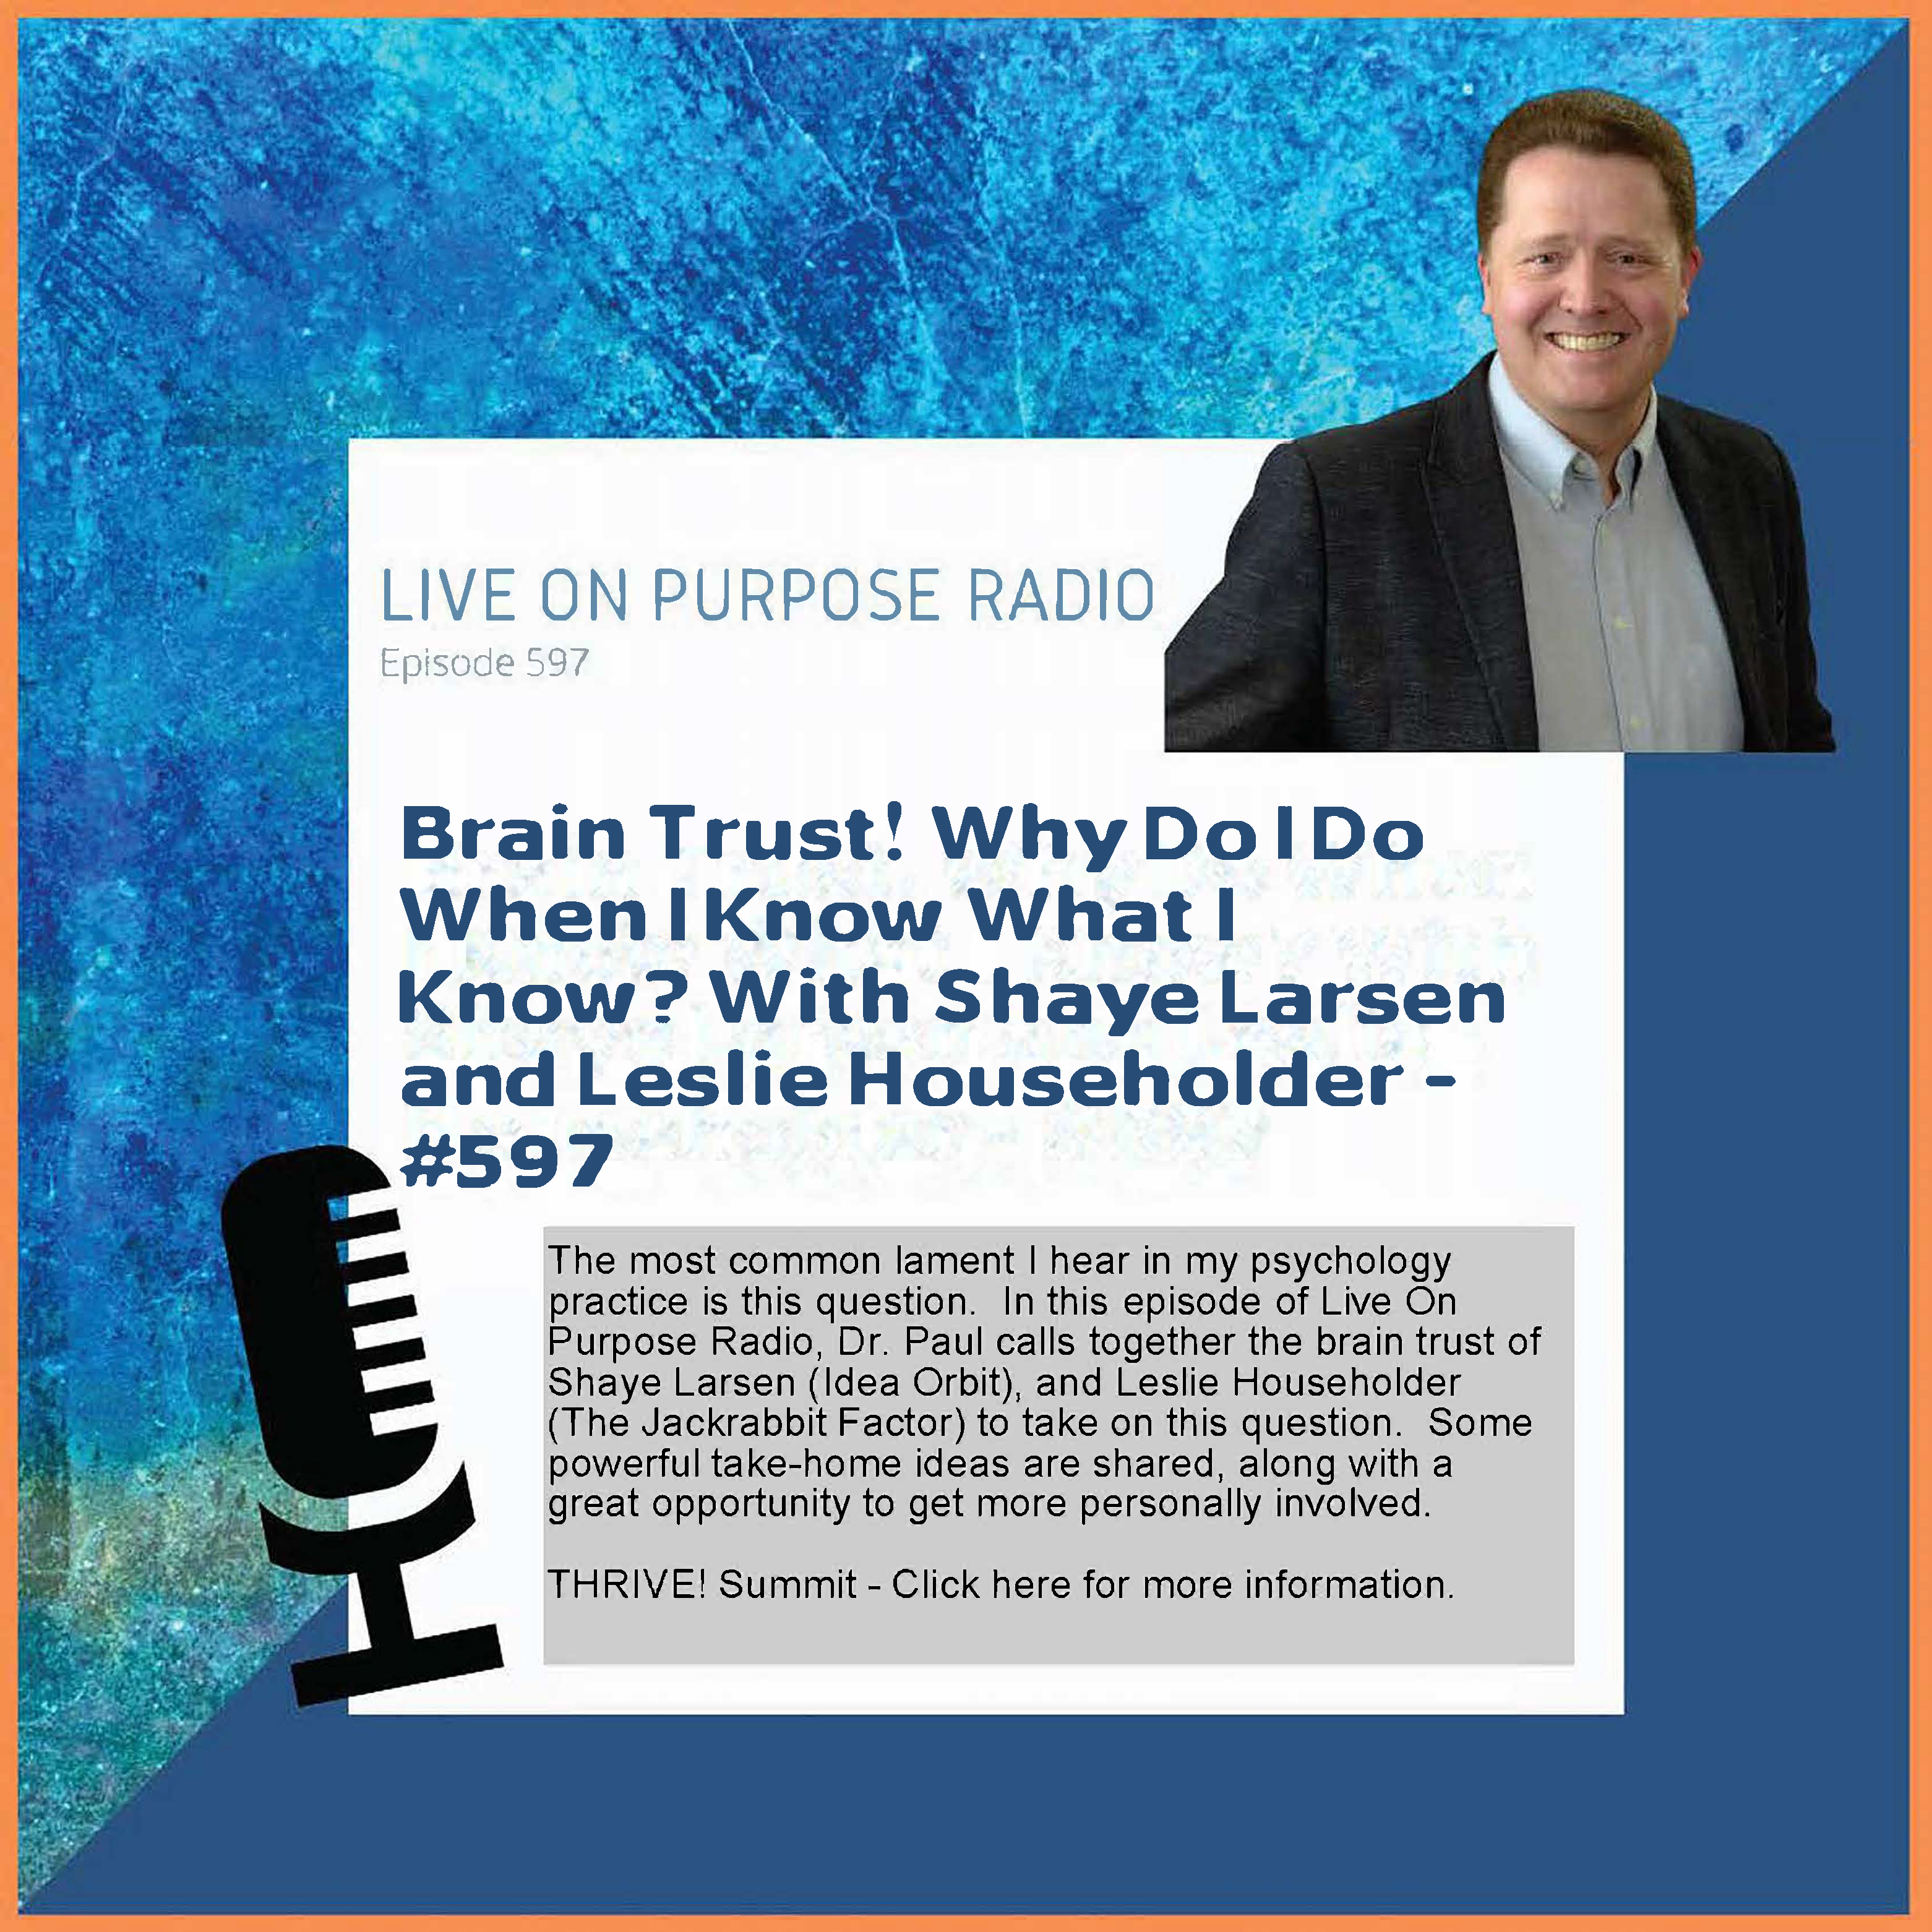 LIVE ON PURPOSE RADIO Episode 597 Brain Trust! Why Do IDo When I Know What I Know? With Shaye Larsen and Leslie Householder - #597 The most common lament I hear in my psychology practice is this question. In this episode of Live On Purpose Kadio, Ur. Paul calls together the brain trust ot Shaye Larsen (Idea Orbit), and Leslie Householder (The Jackrabbit Factor) to take on this question. Some powerful take-home ideas are shared, along with a great opportunity to get more personally involved. THRIVE! Summit - Click here for more information.